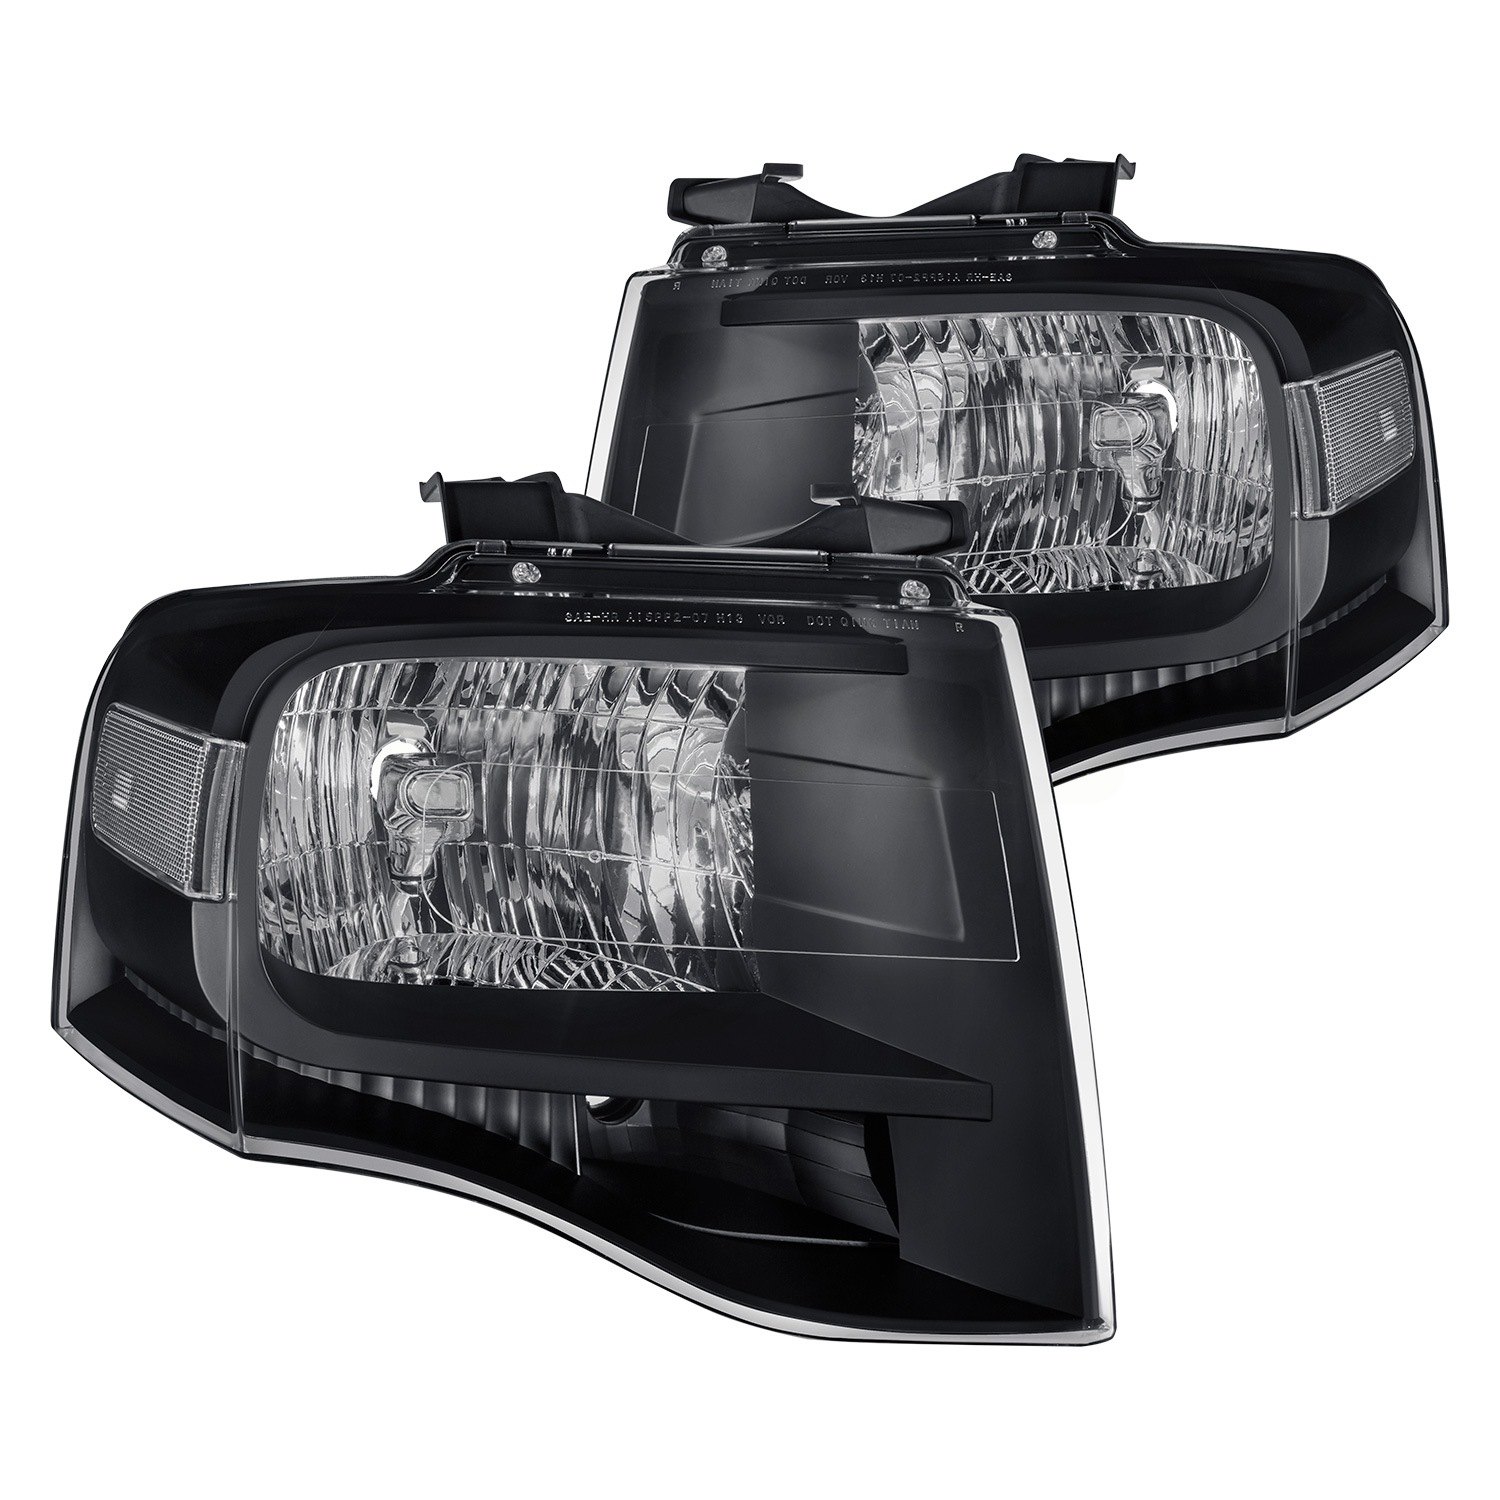 FOR 2007-2014 FORD EXPEDITION FACTORY STYLE REPLACEMENT HEADLIGHTS LAMPS BLACK